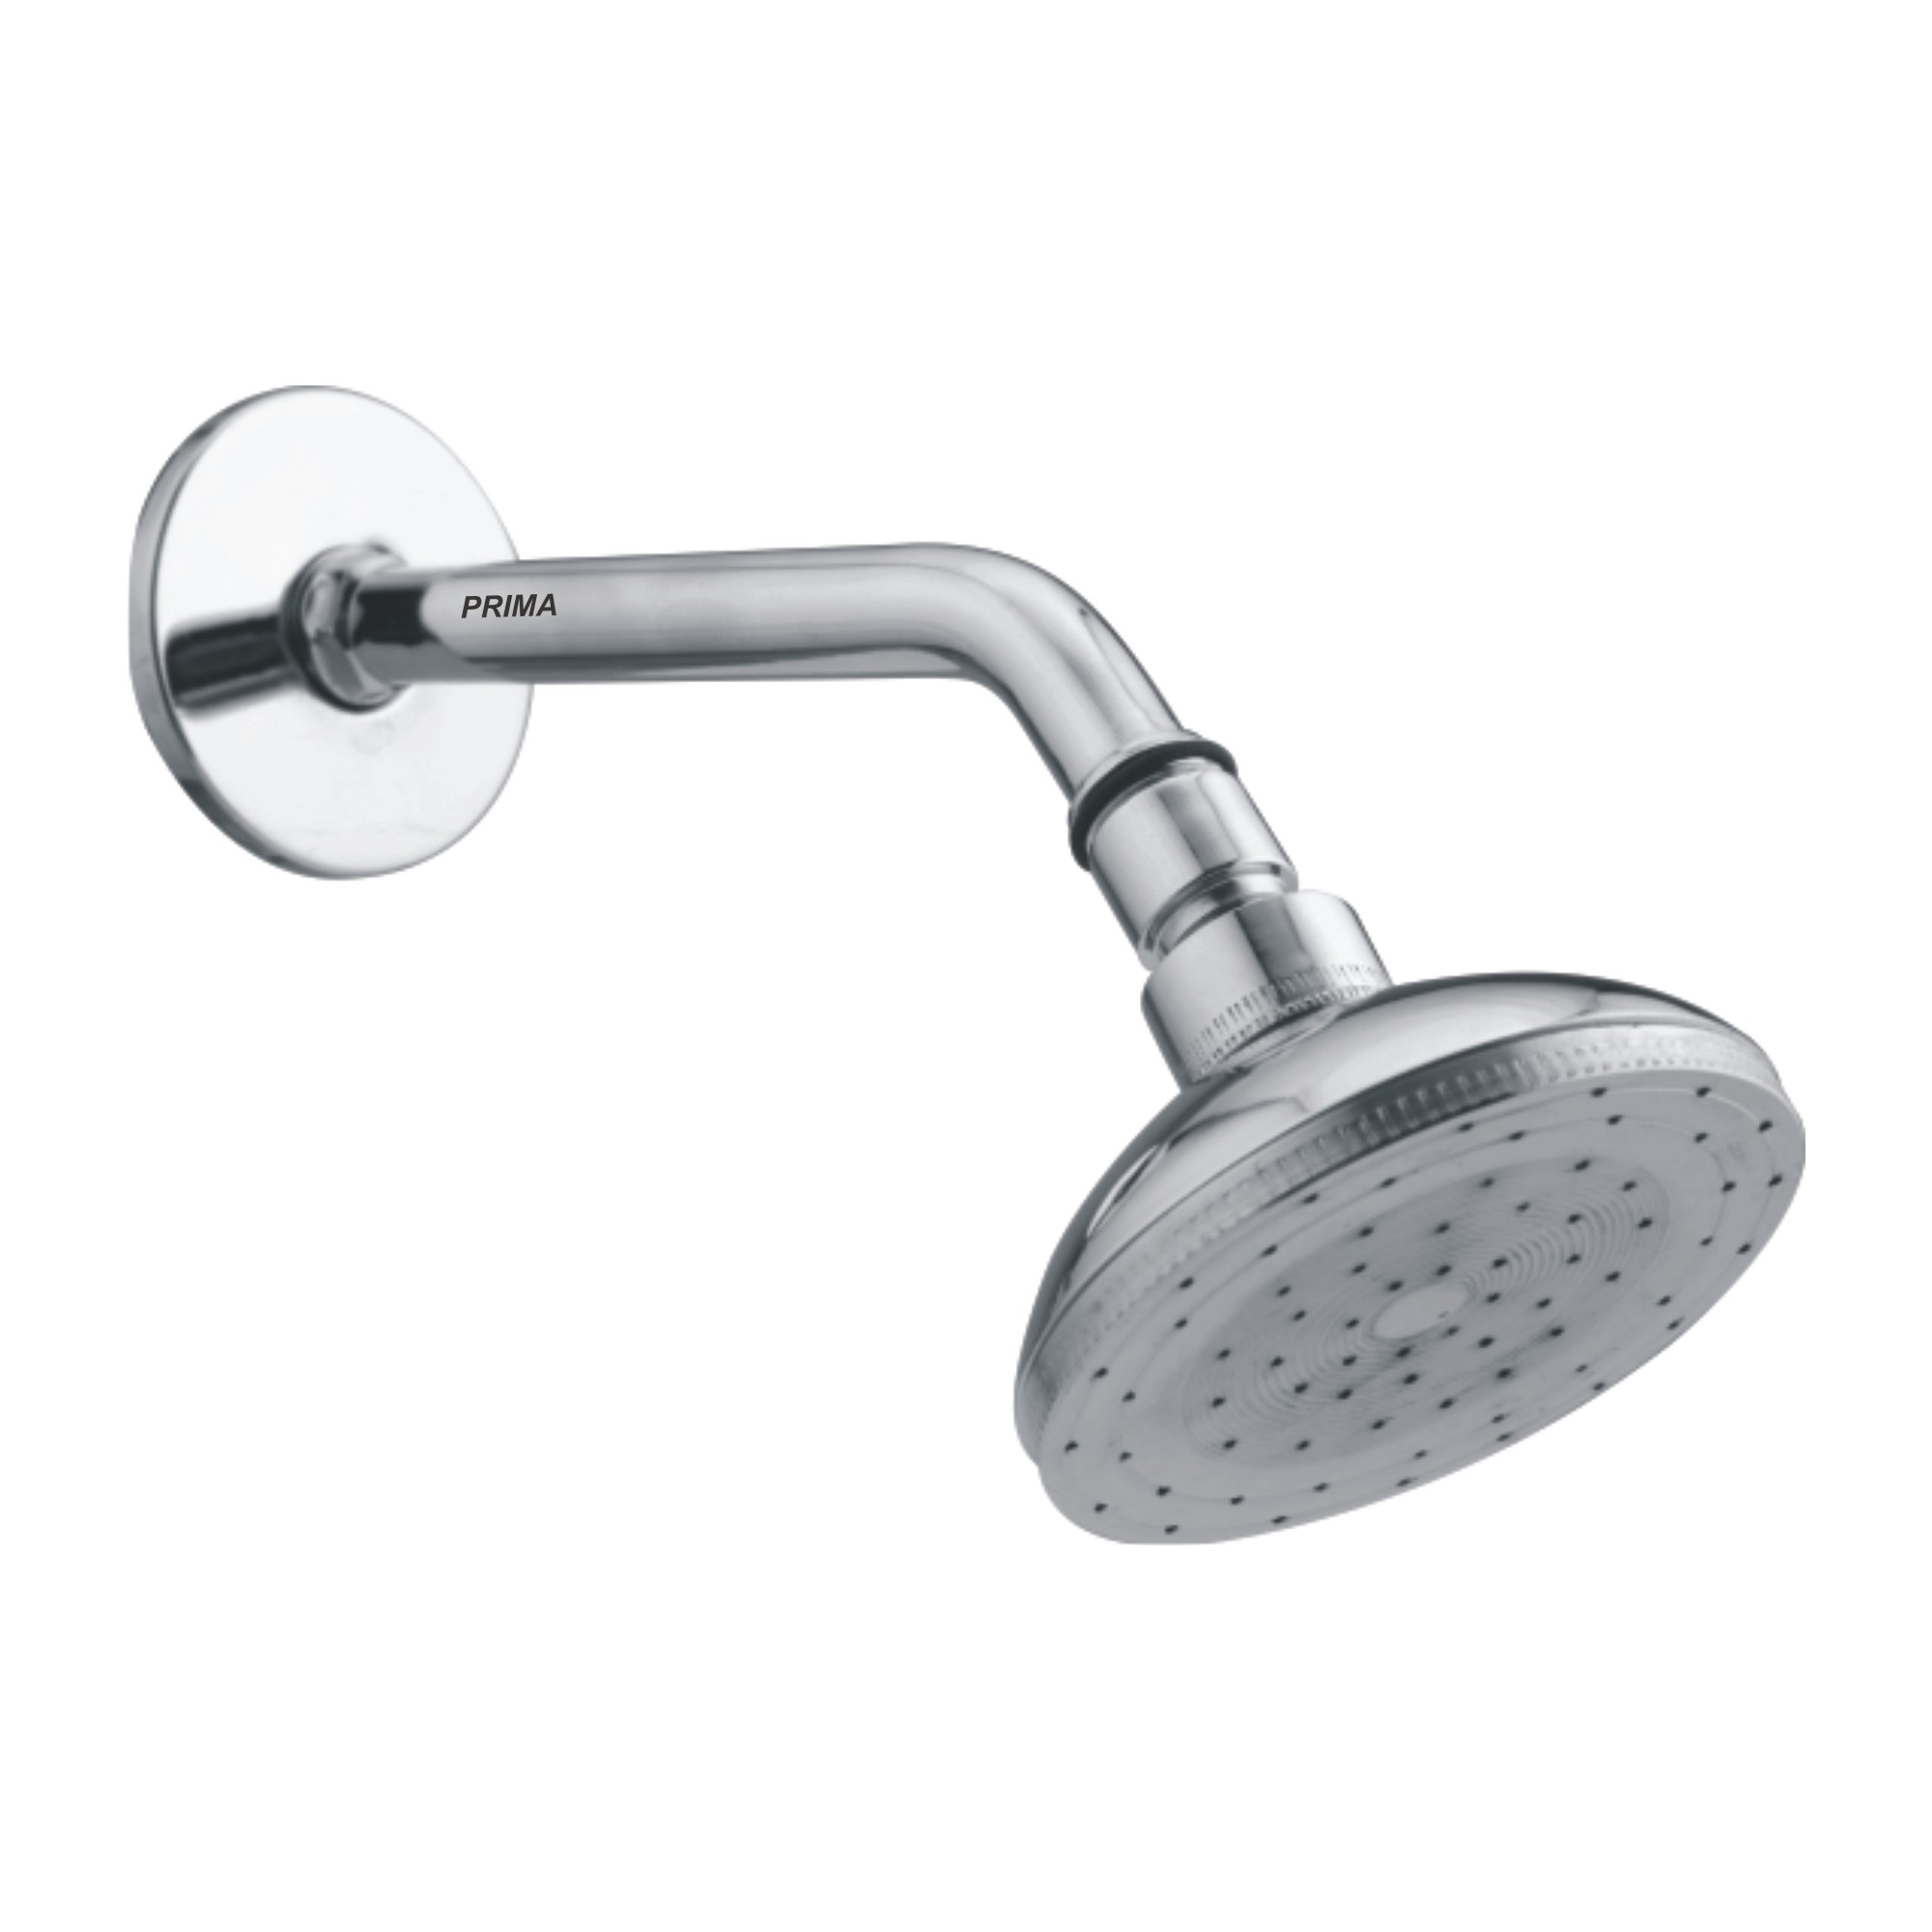 C.P OVERHEAD SHOWER WITH ARM -TURBO